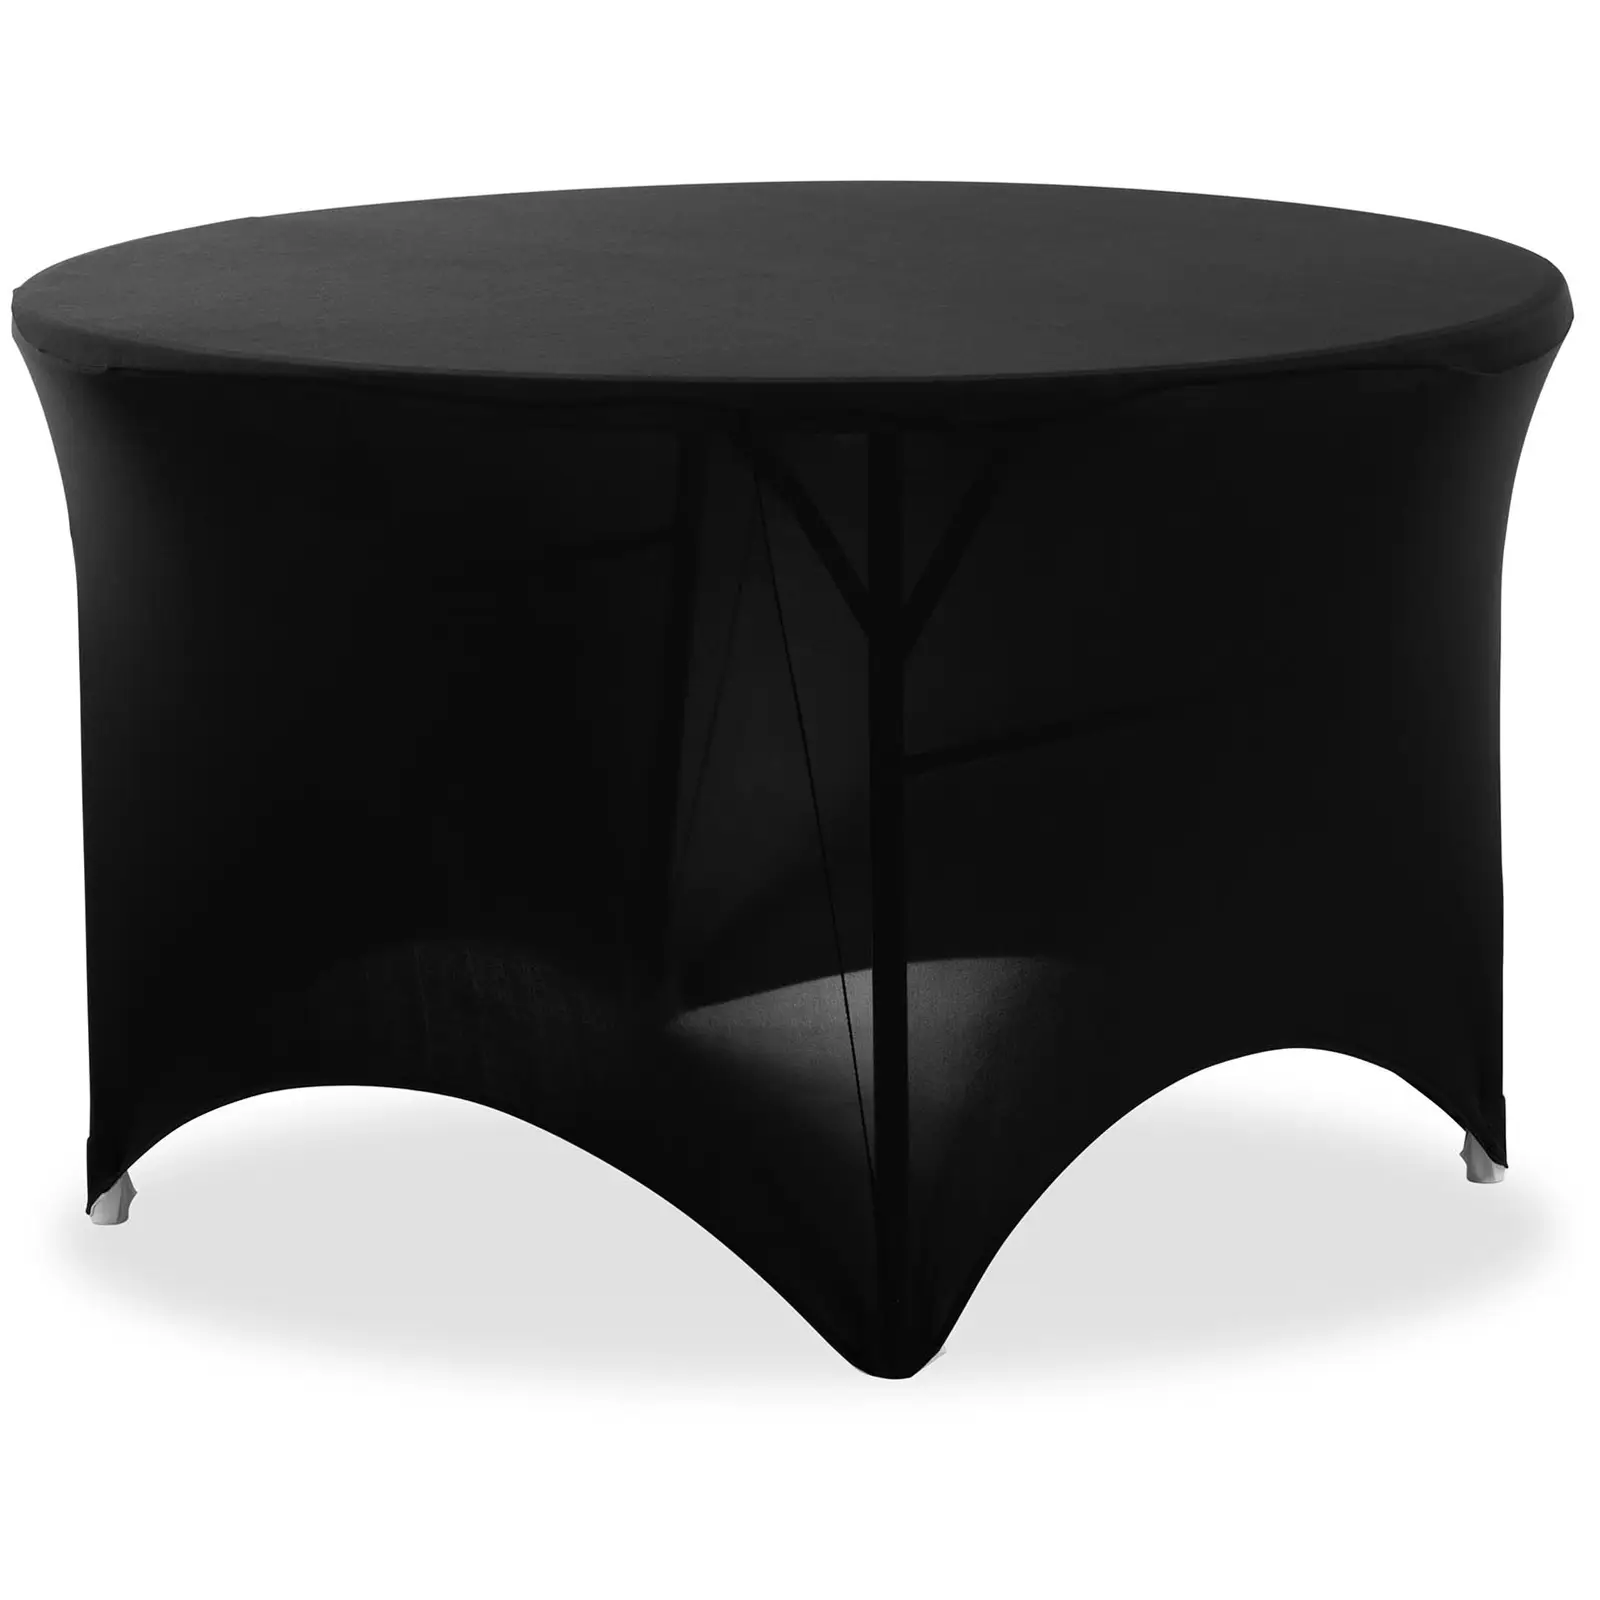 Table Cover - Black - Royal Catering - round